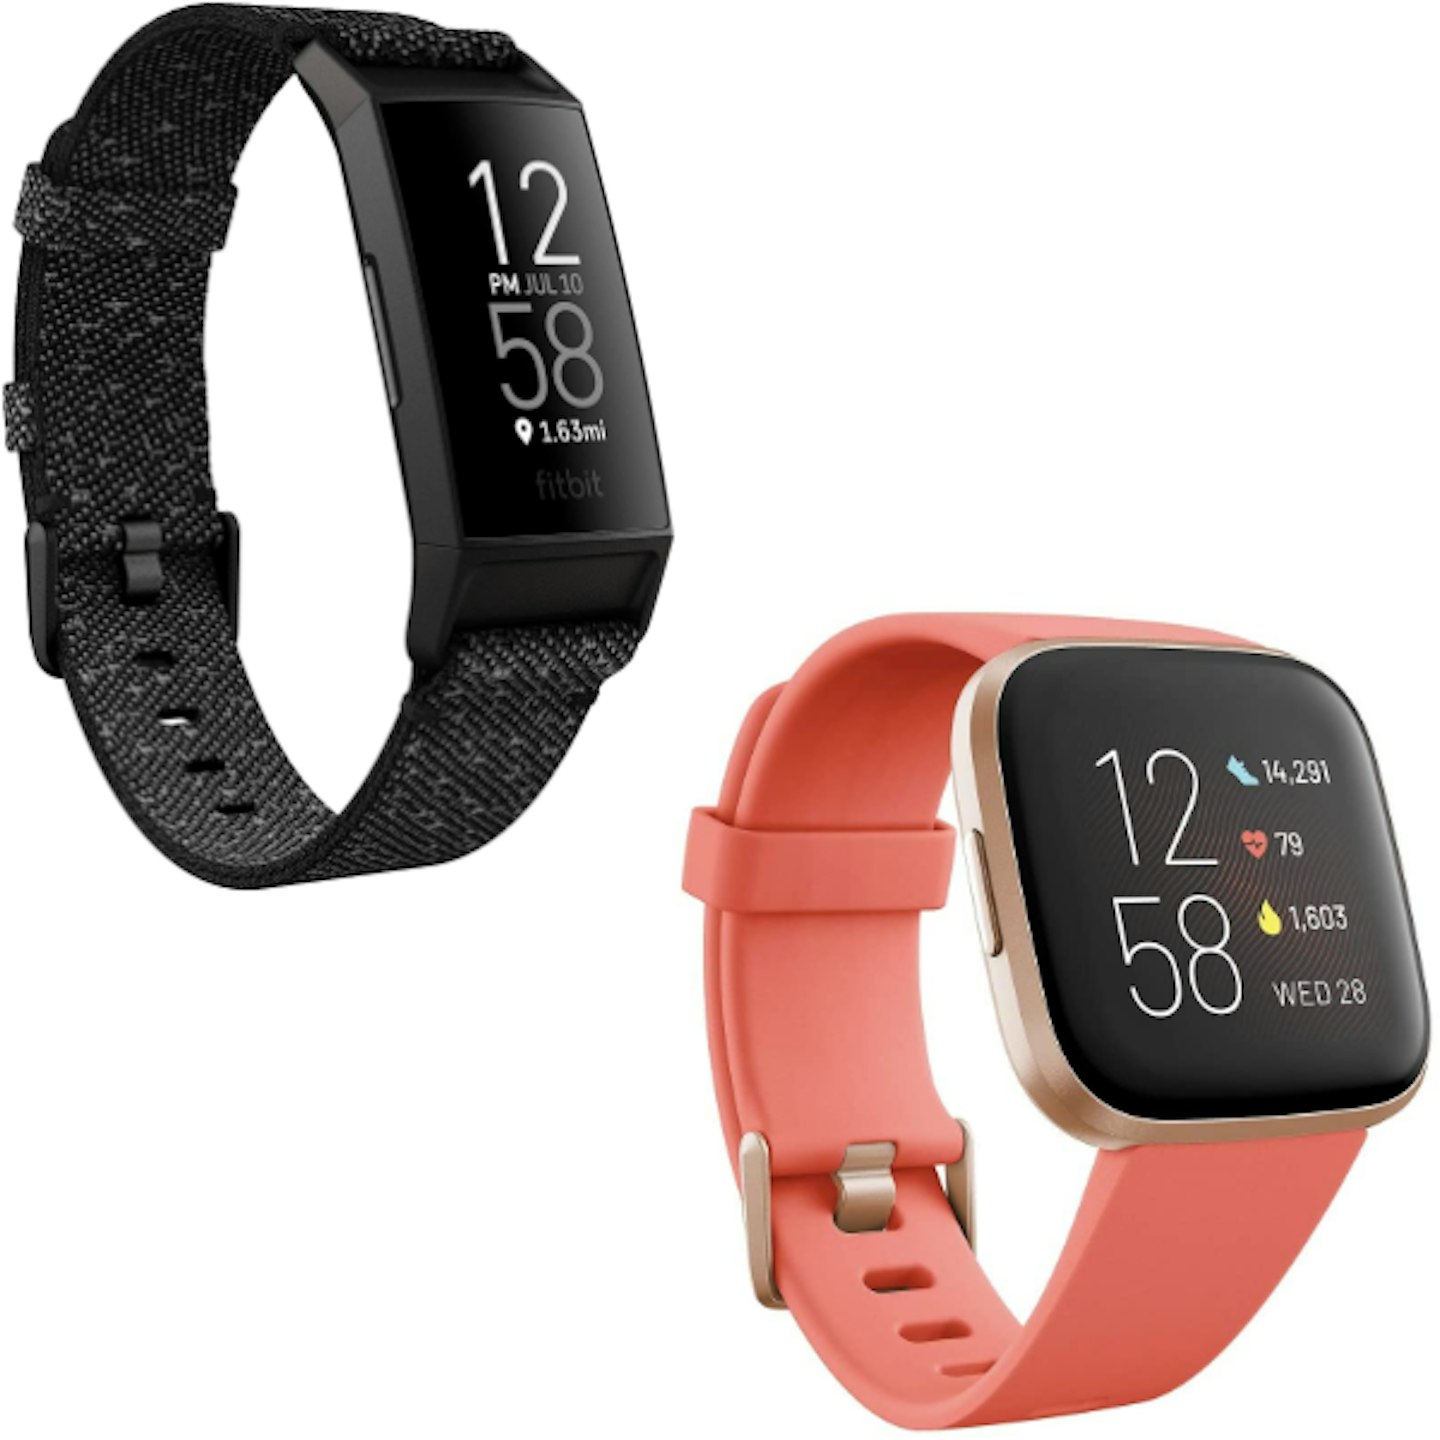 Up to 35% off Fitbit Versa 2 and Charge 4